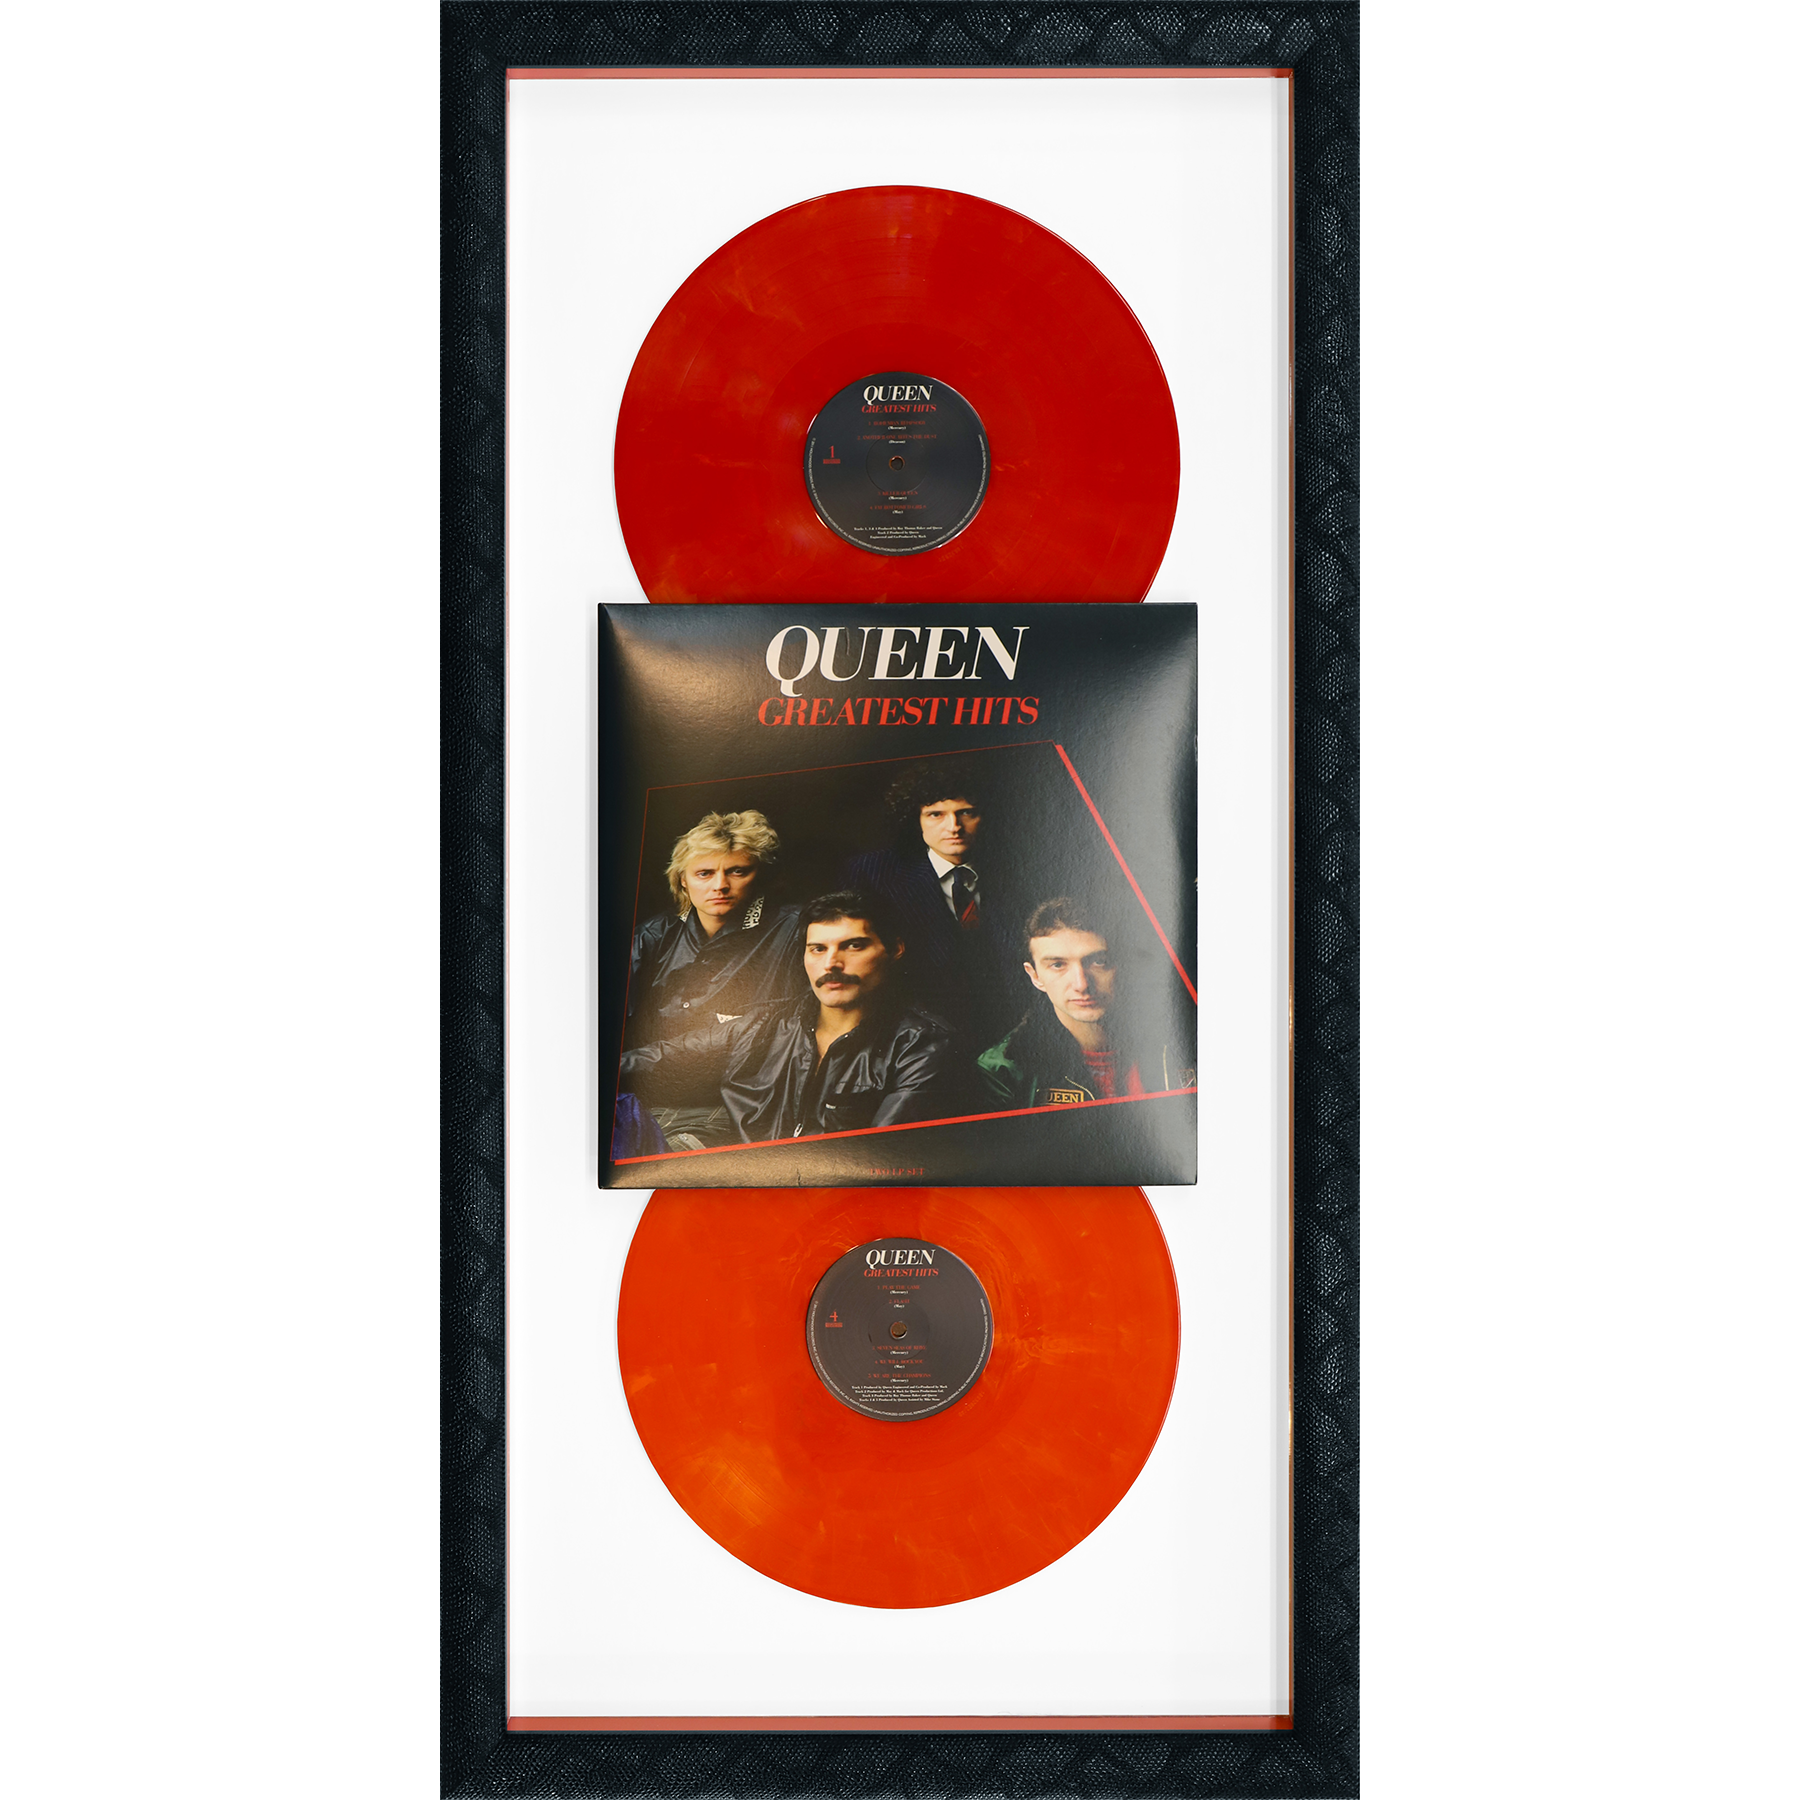 Queen's Greatest Hits Vinyl Records in Custom Black Snakeskin Shadow Box with Red Acrylic Sides